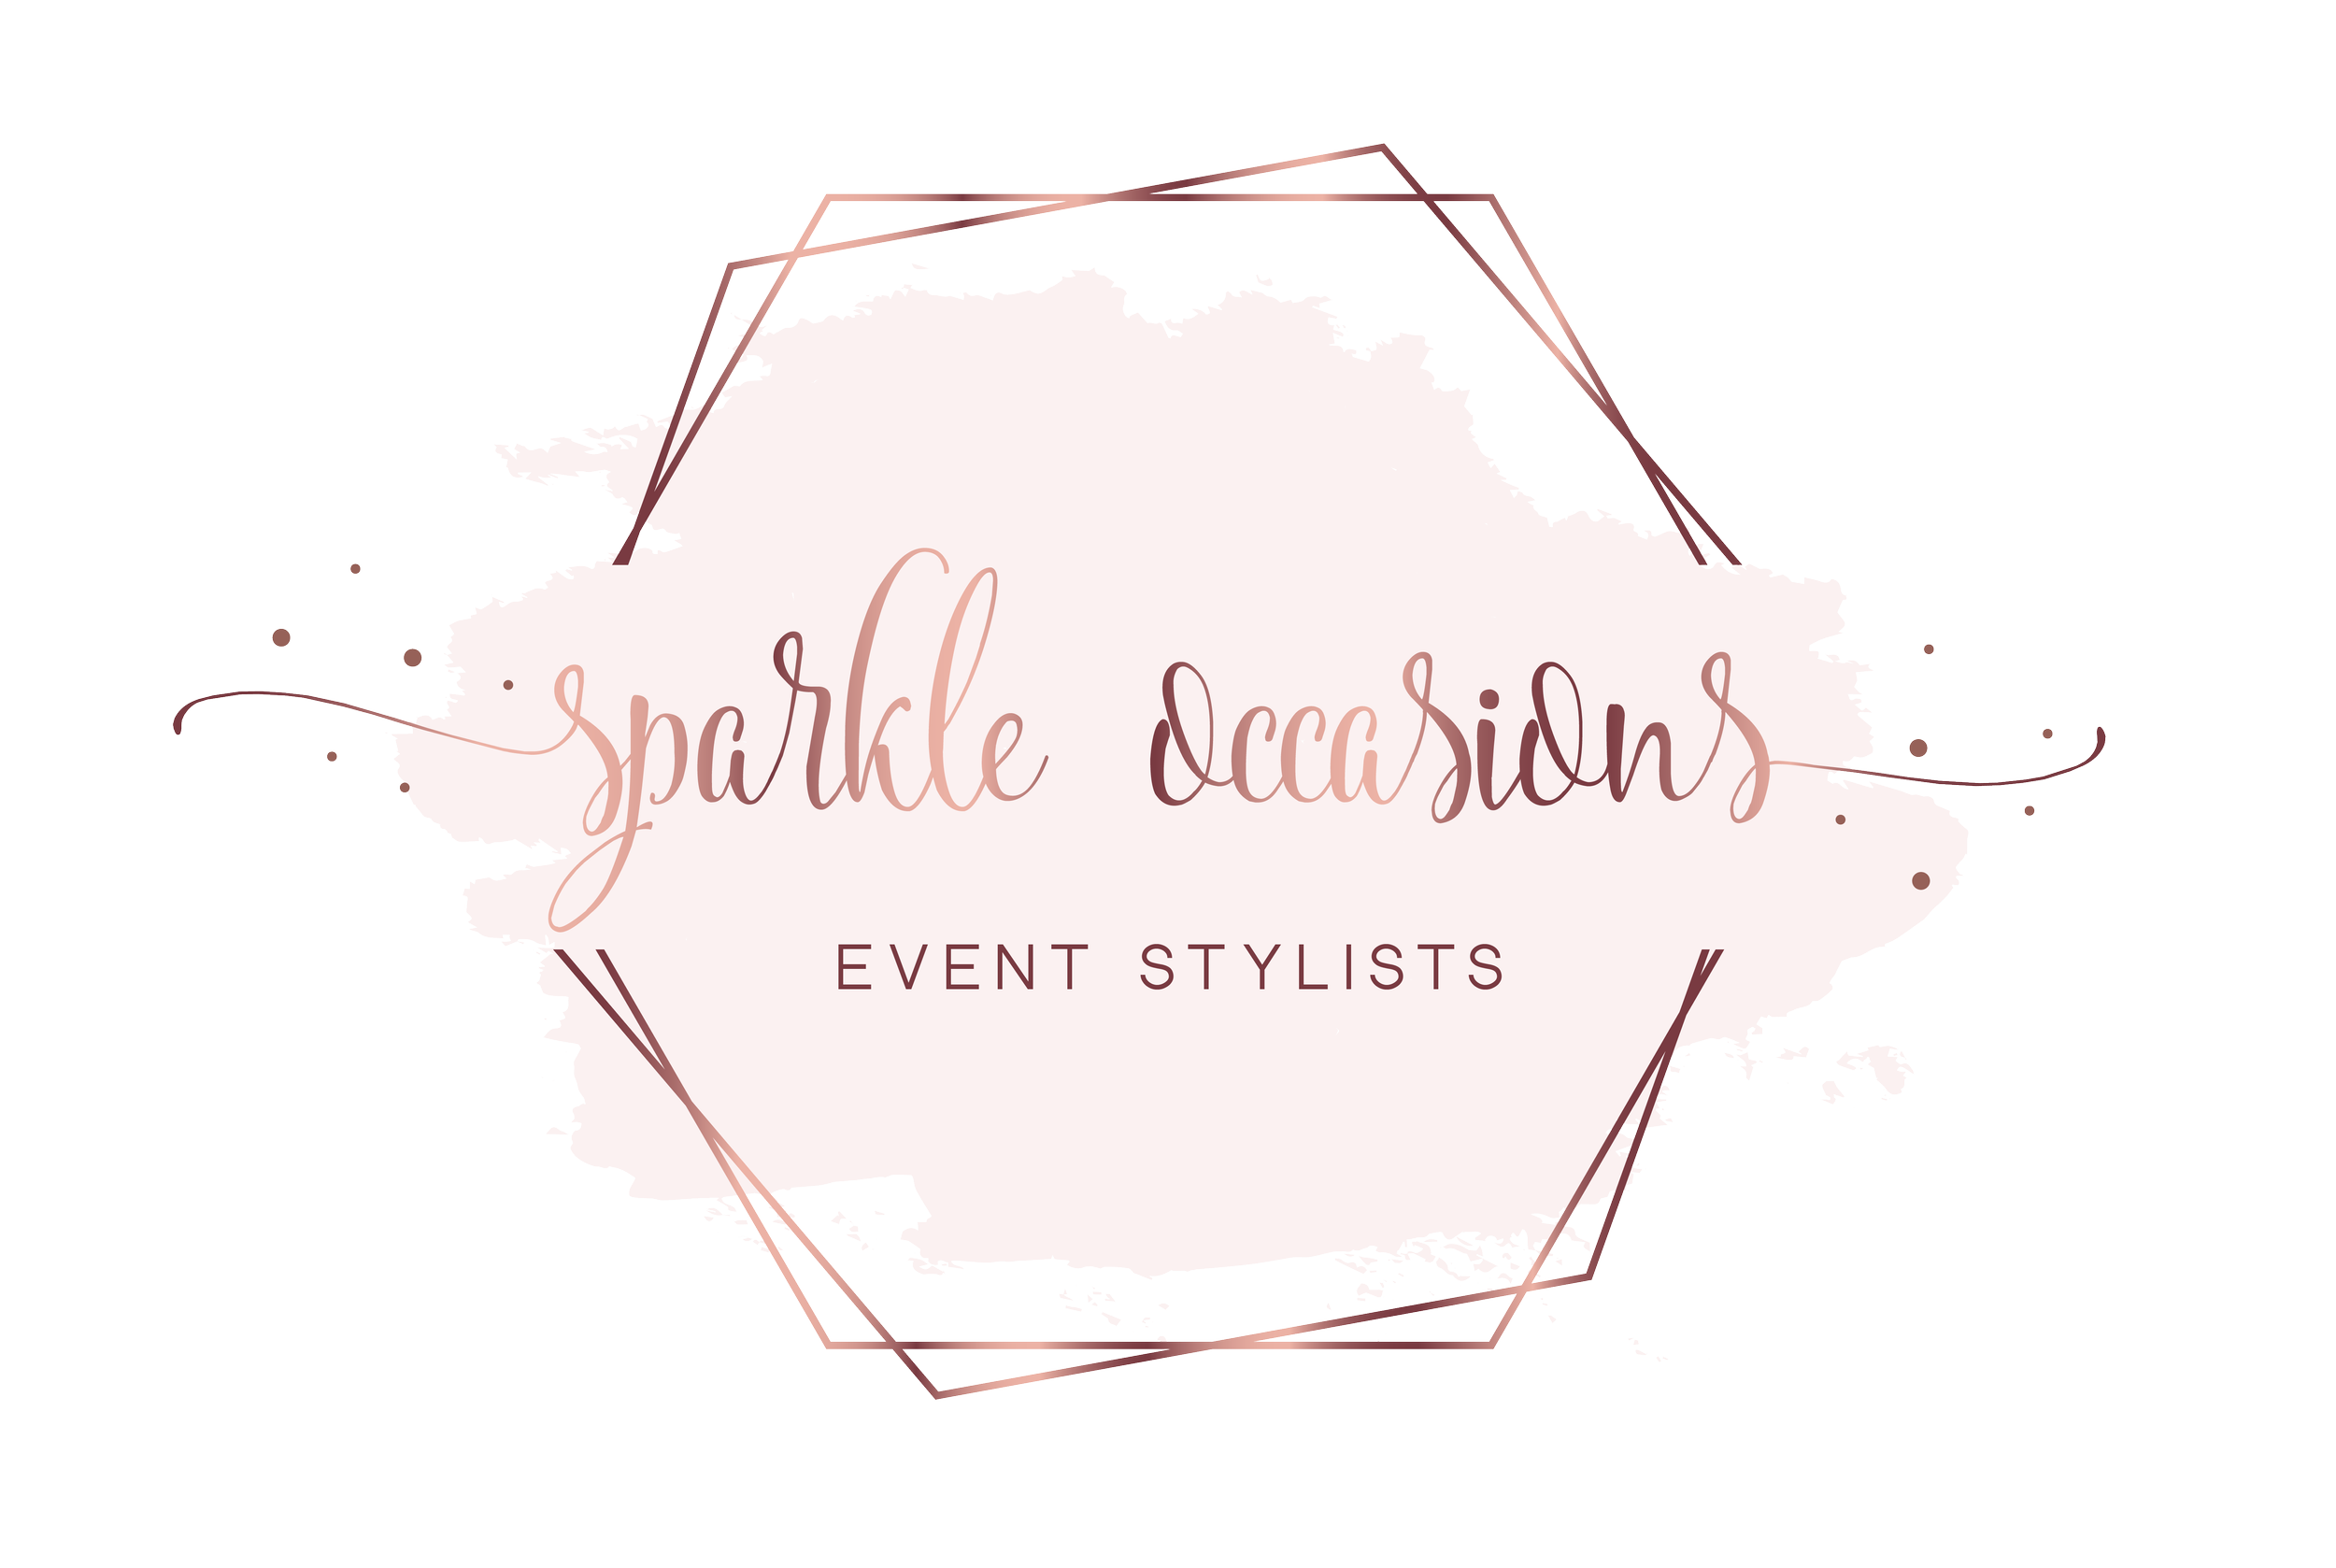 Contact 1 Sparkle Occasions Events